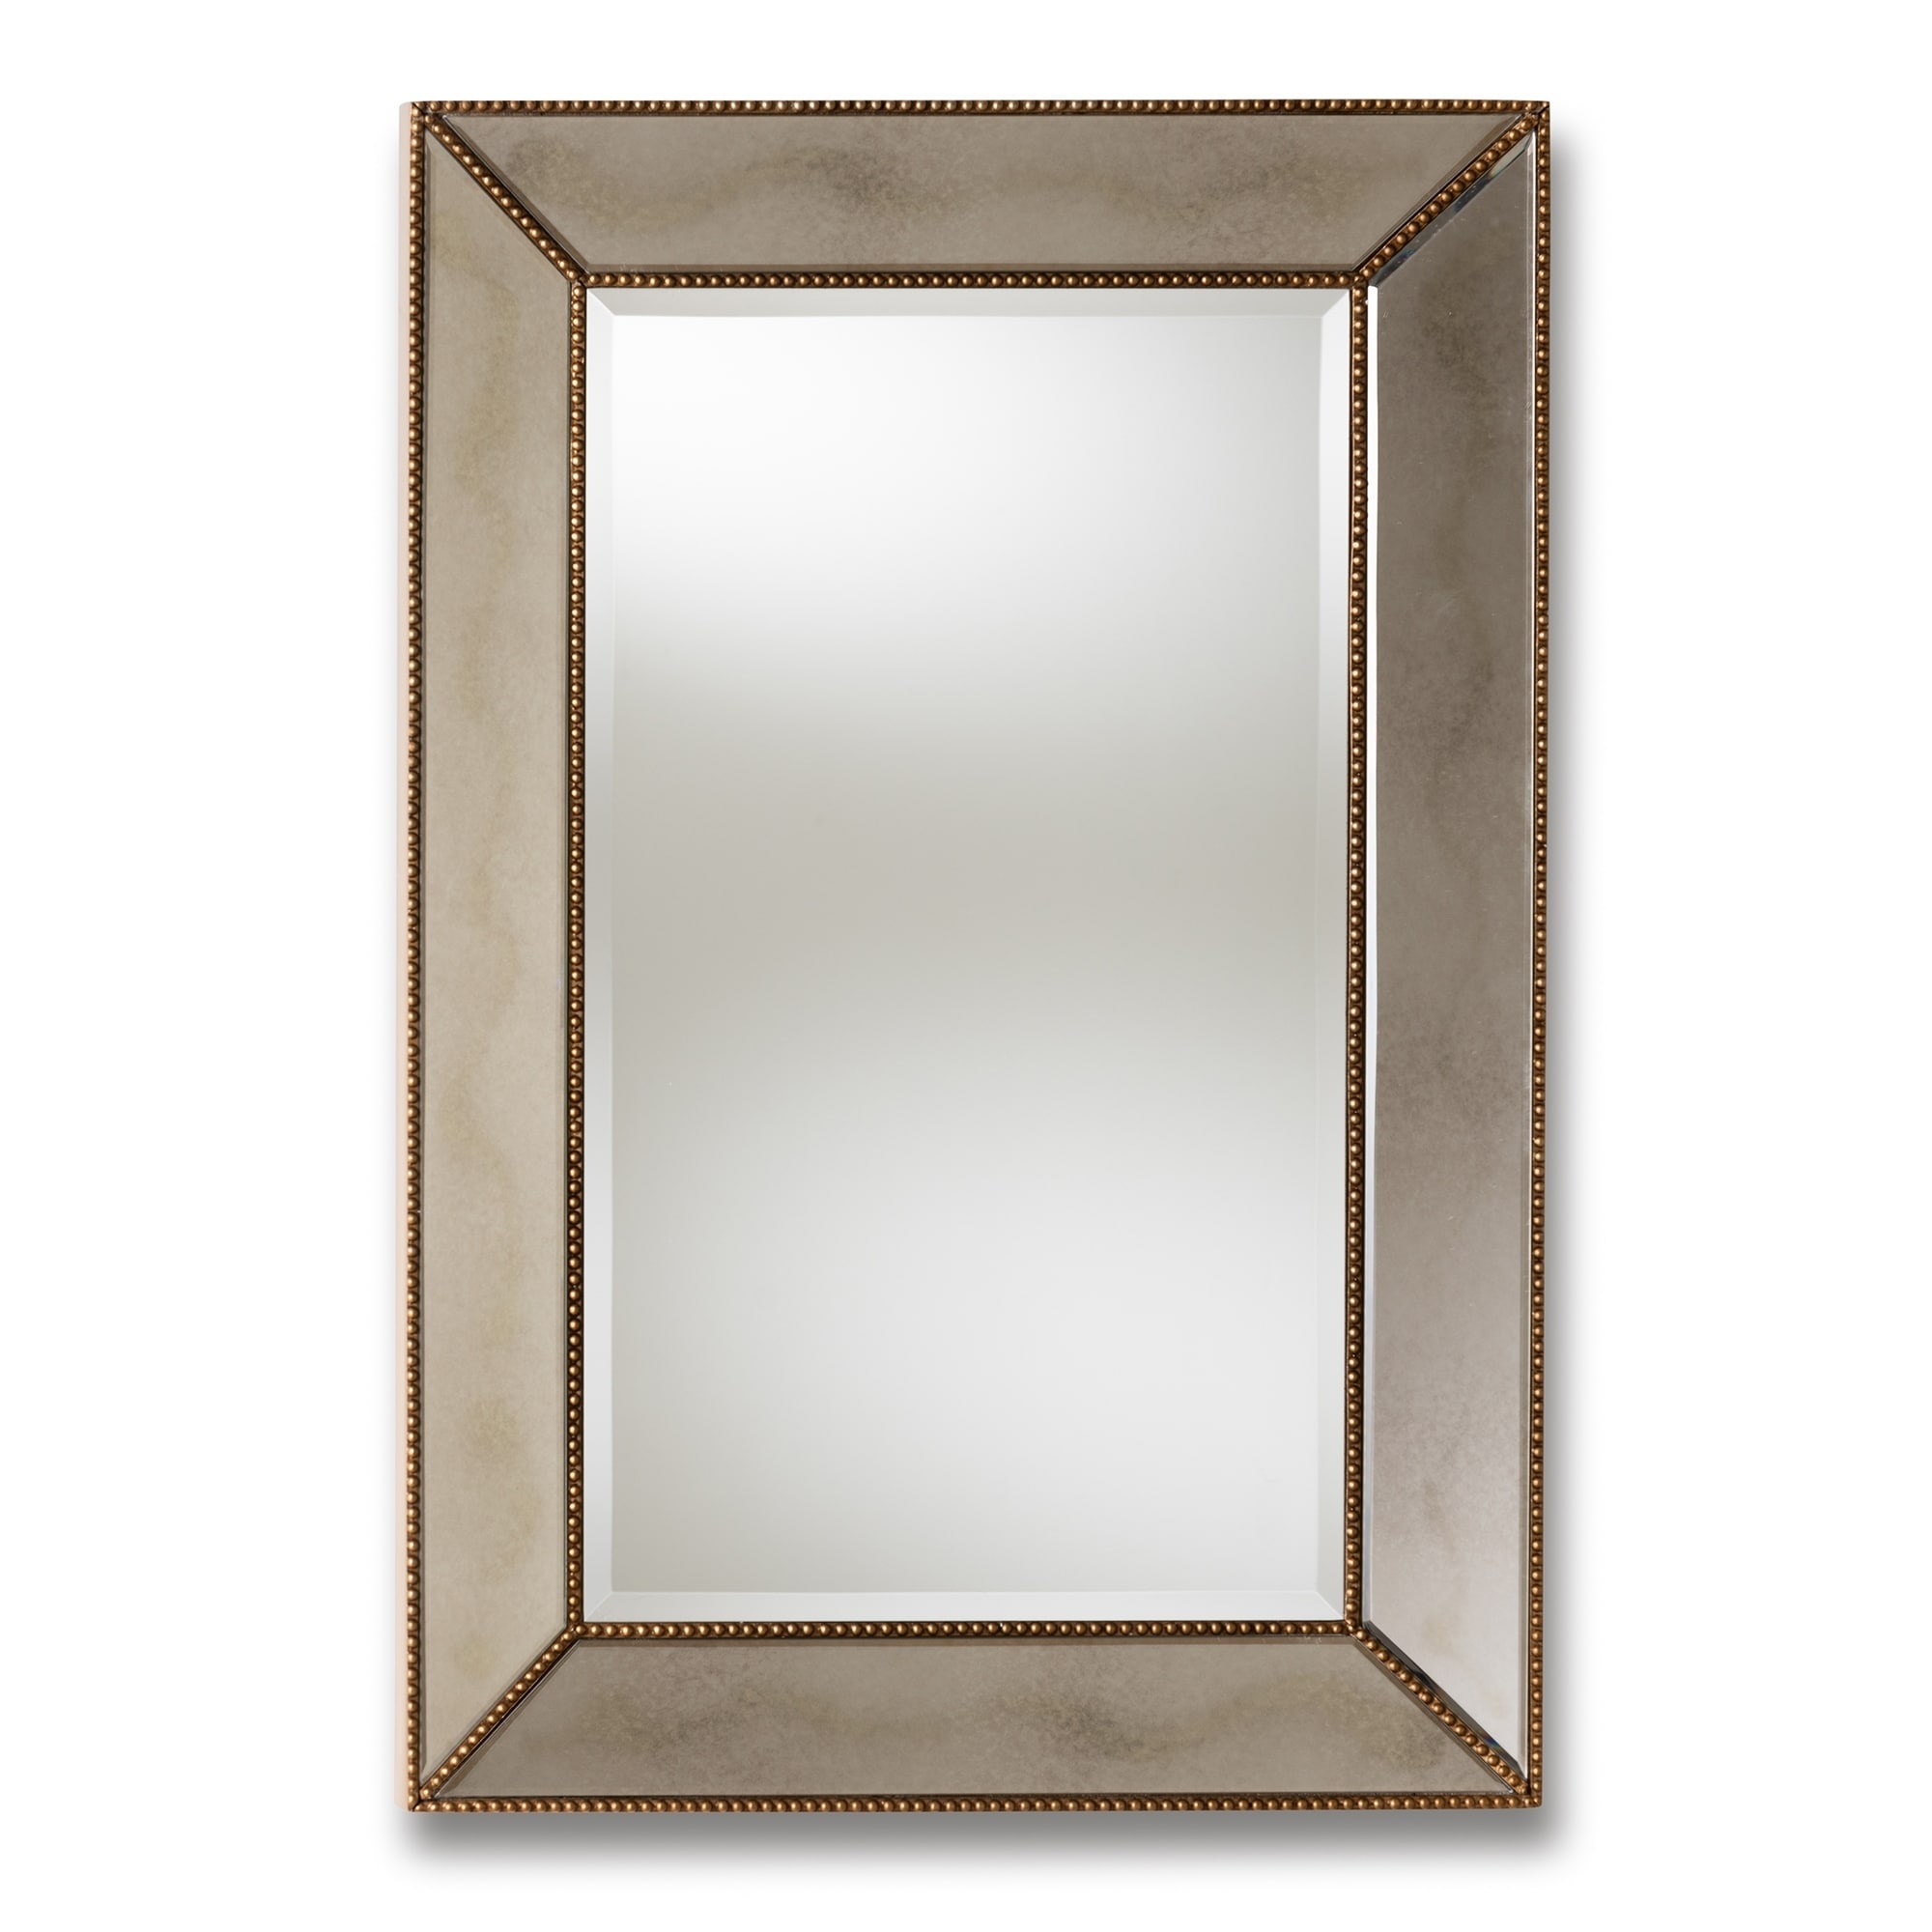 Contemporary Antique Gold Rectangular Wall Mirror by Baxton Studio - Antique Gold